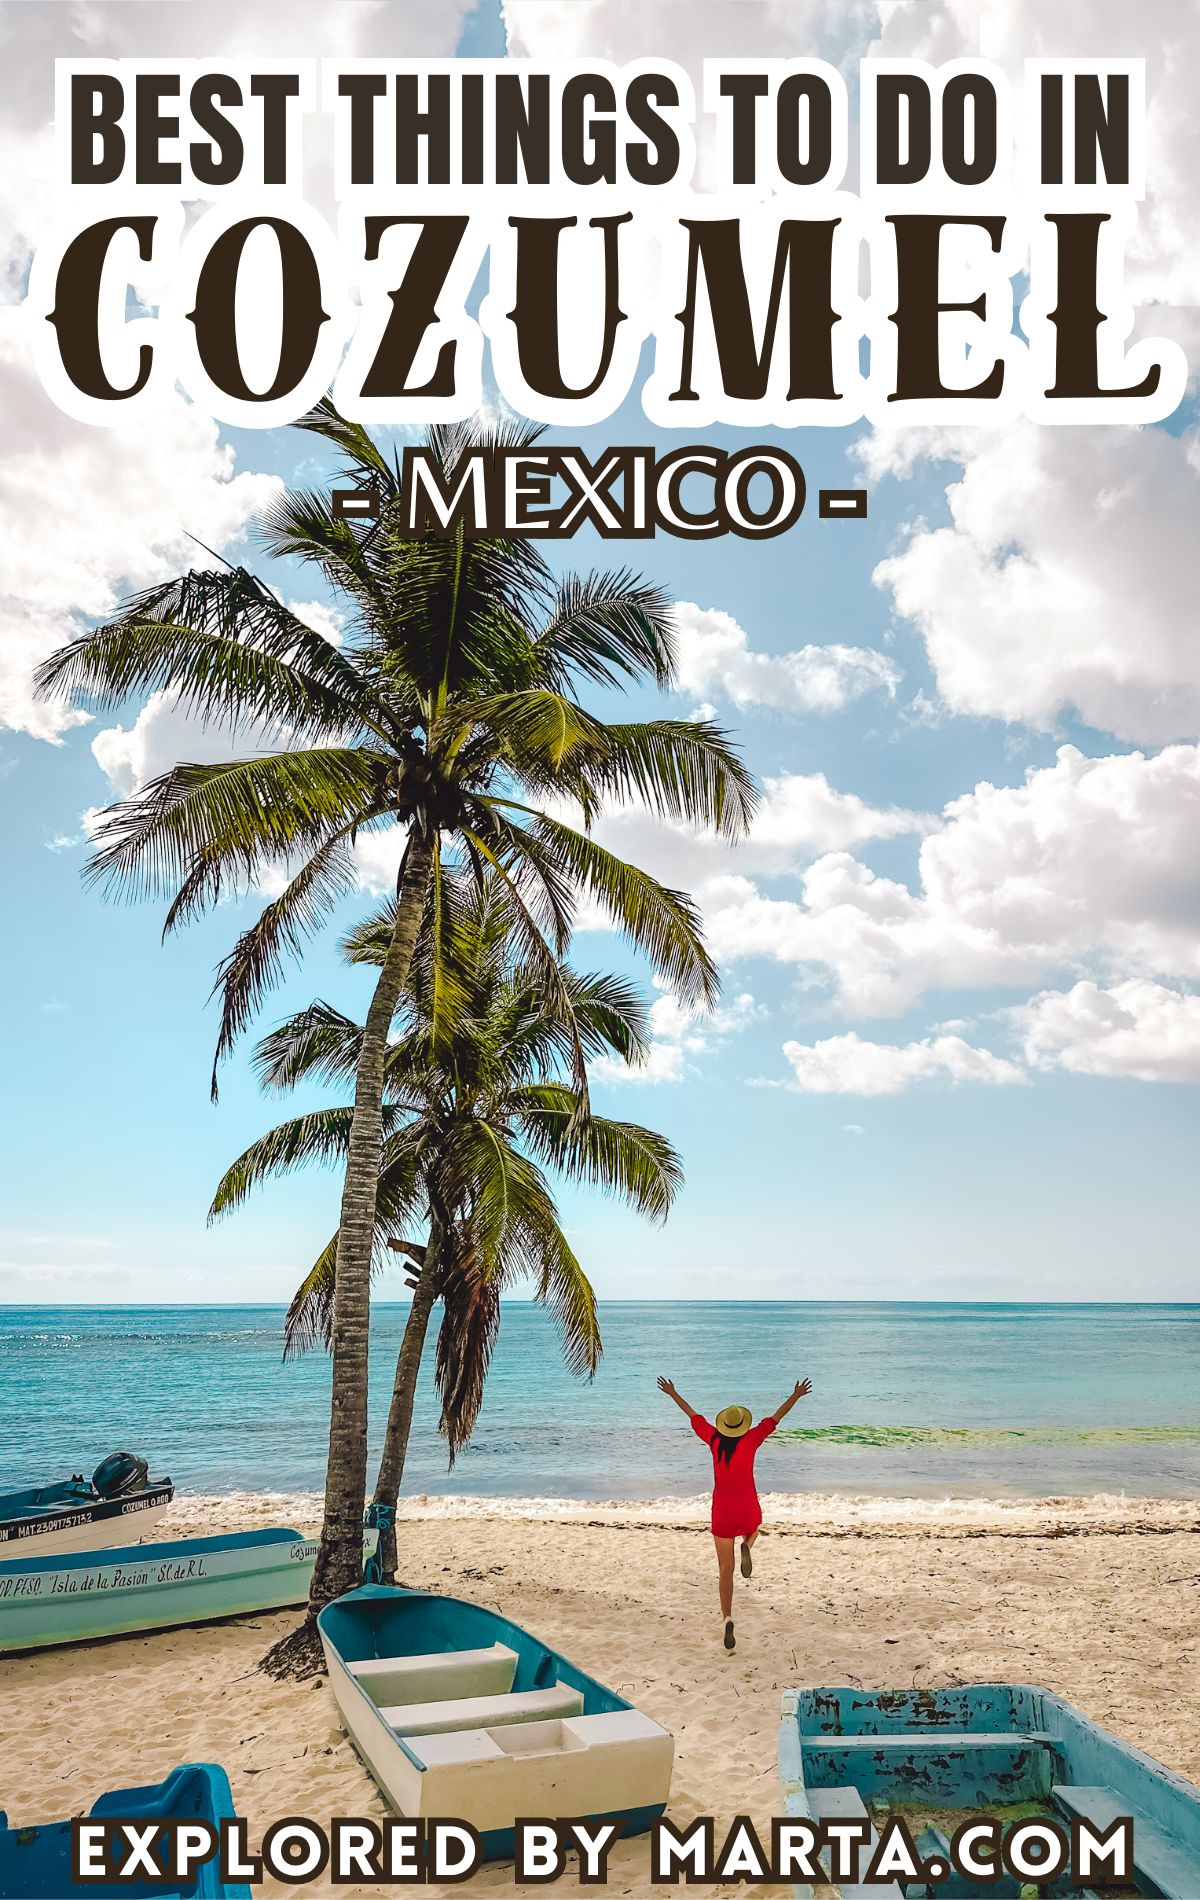 Best things to do in Cozumel, Mexico